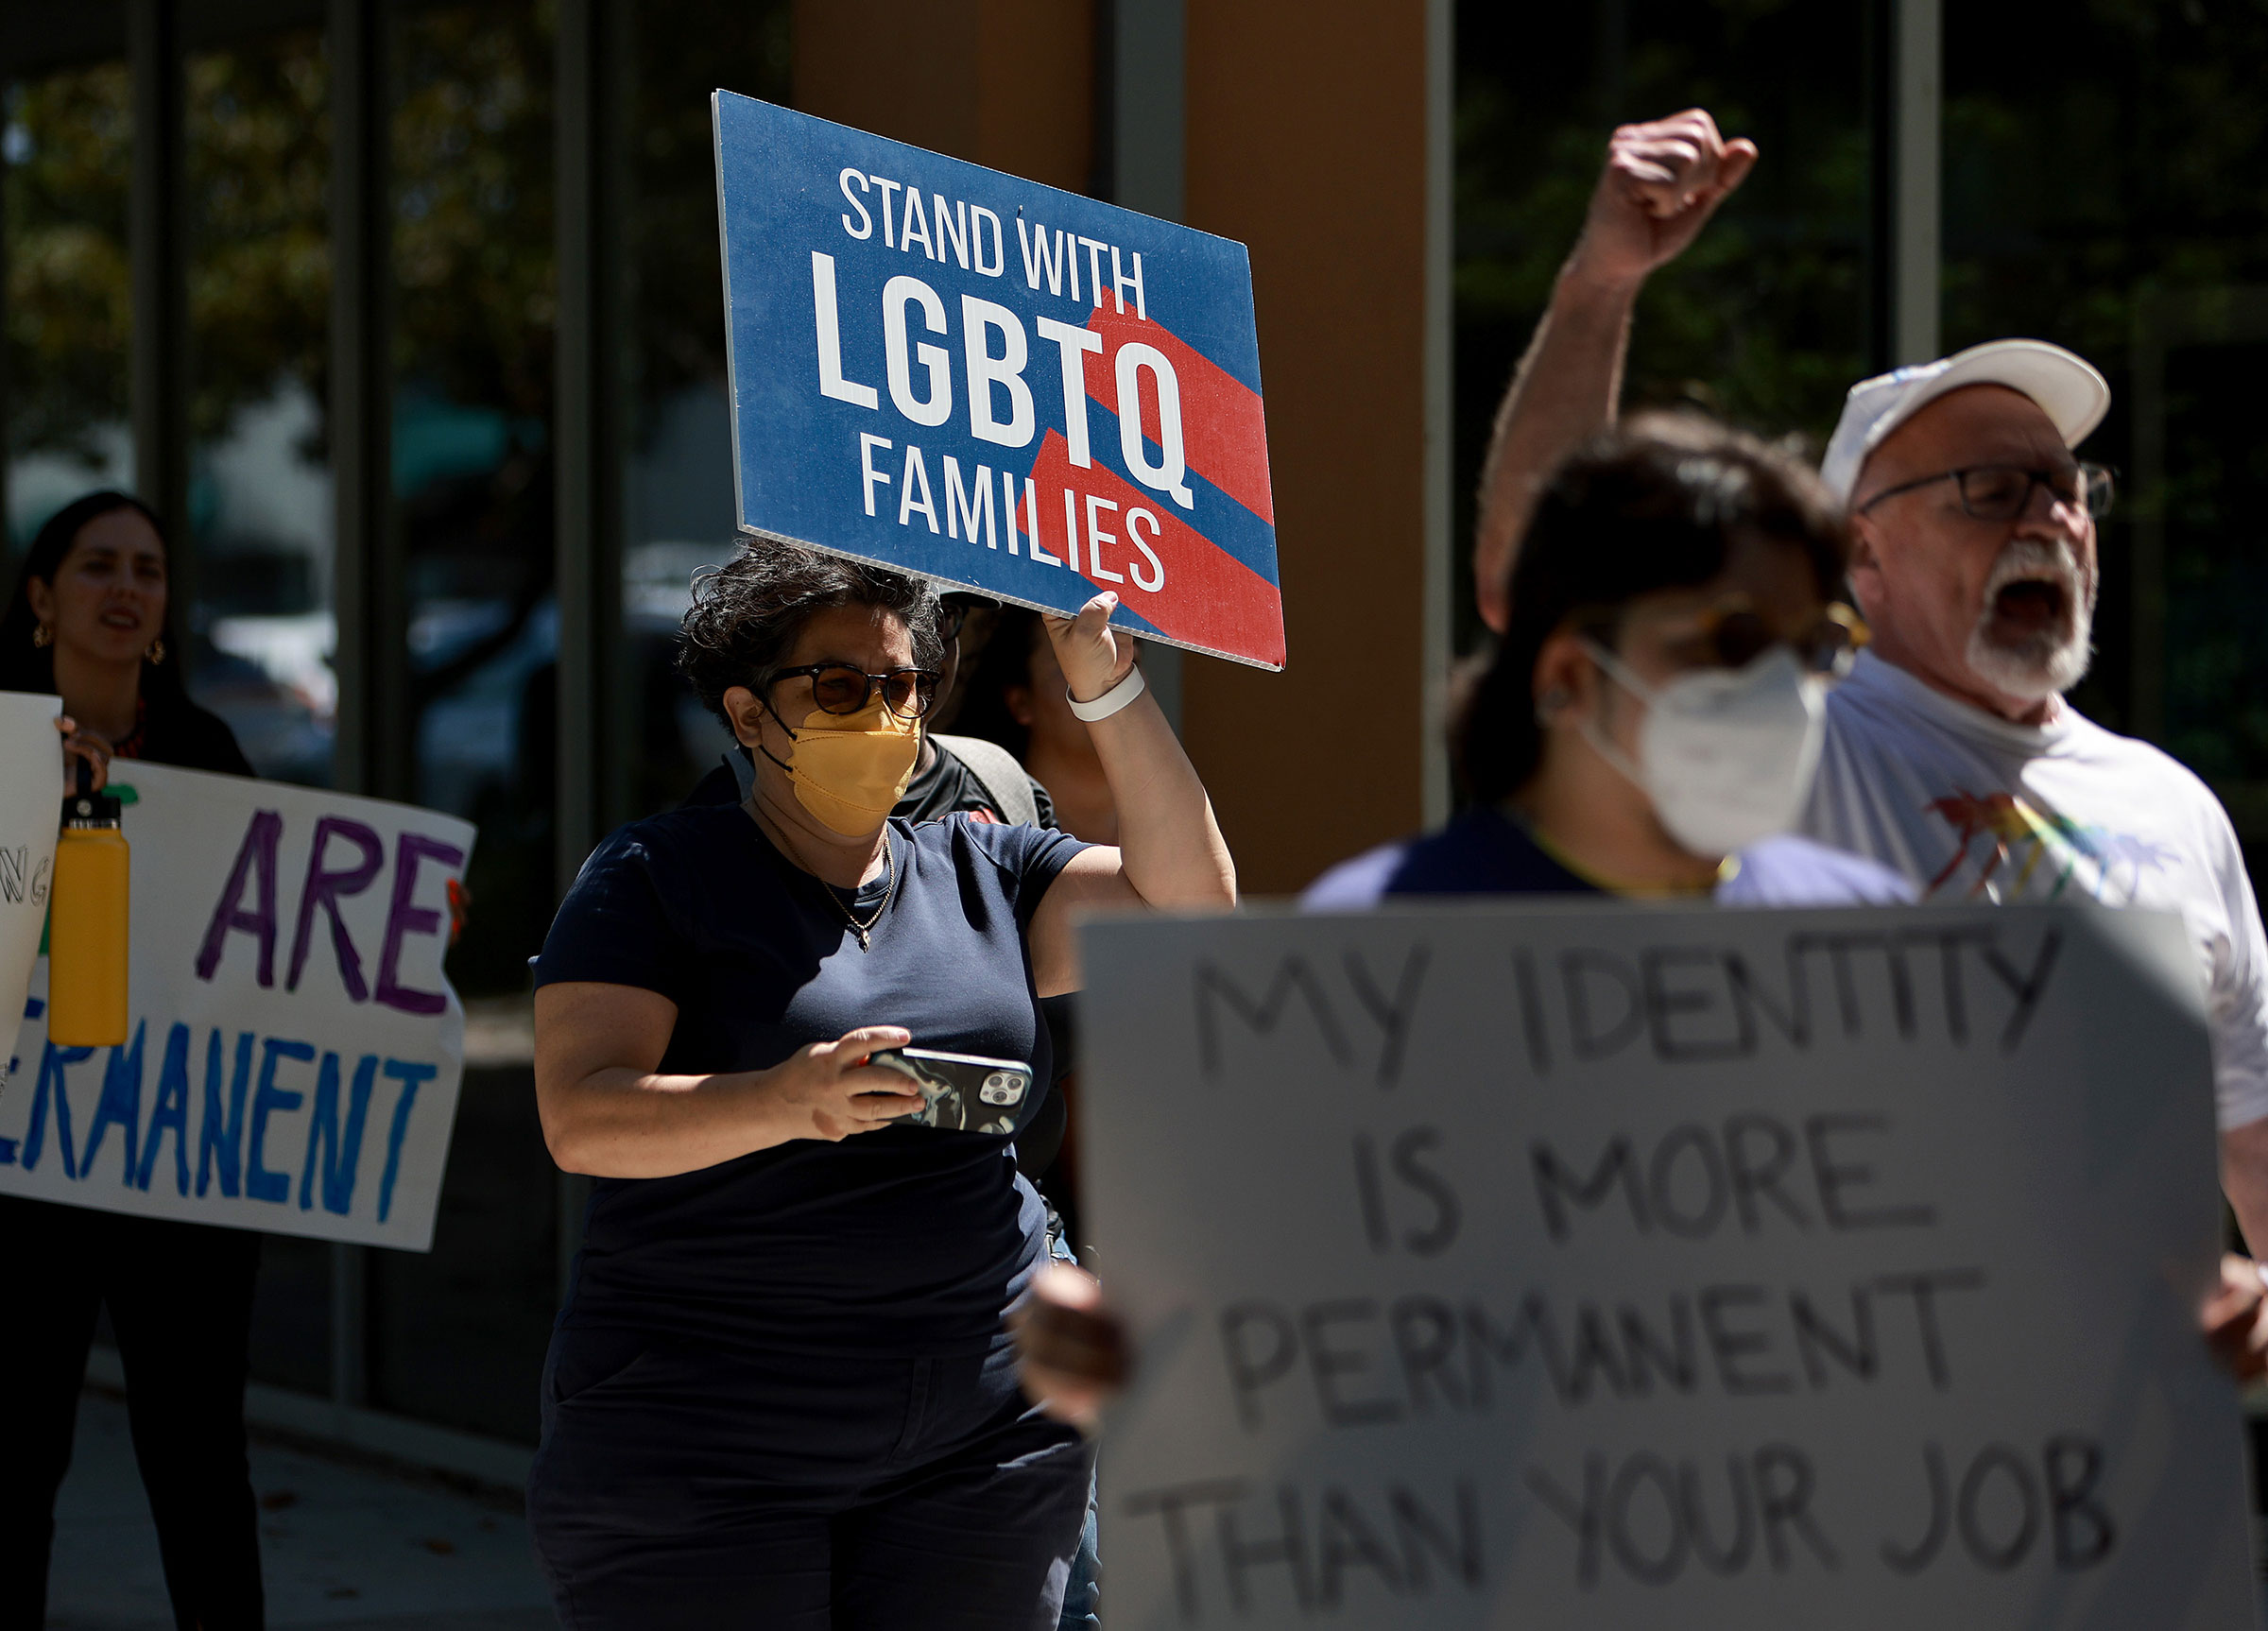 People protest in front of Florida State Senator Ileana Garcia's office after the passage of the Parental Rights in Education bill in Miami, on March 9, 2022. (Joe Raedle—Getty Images)